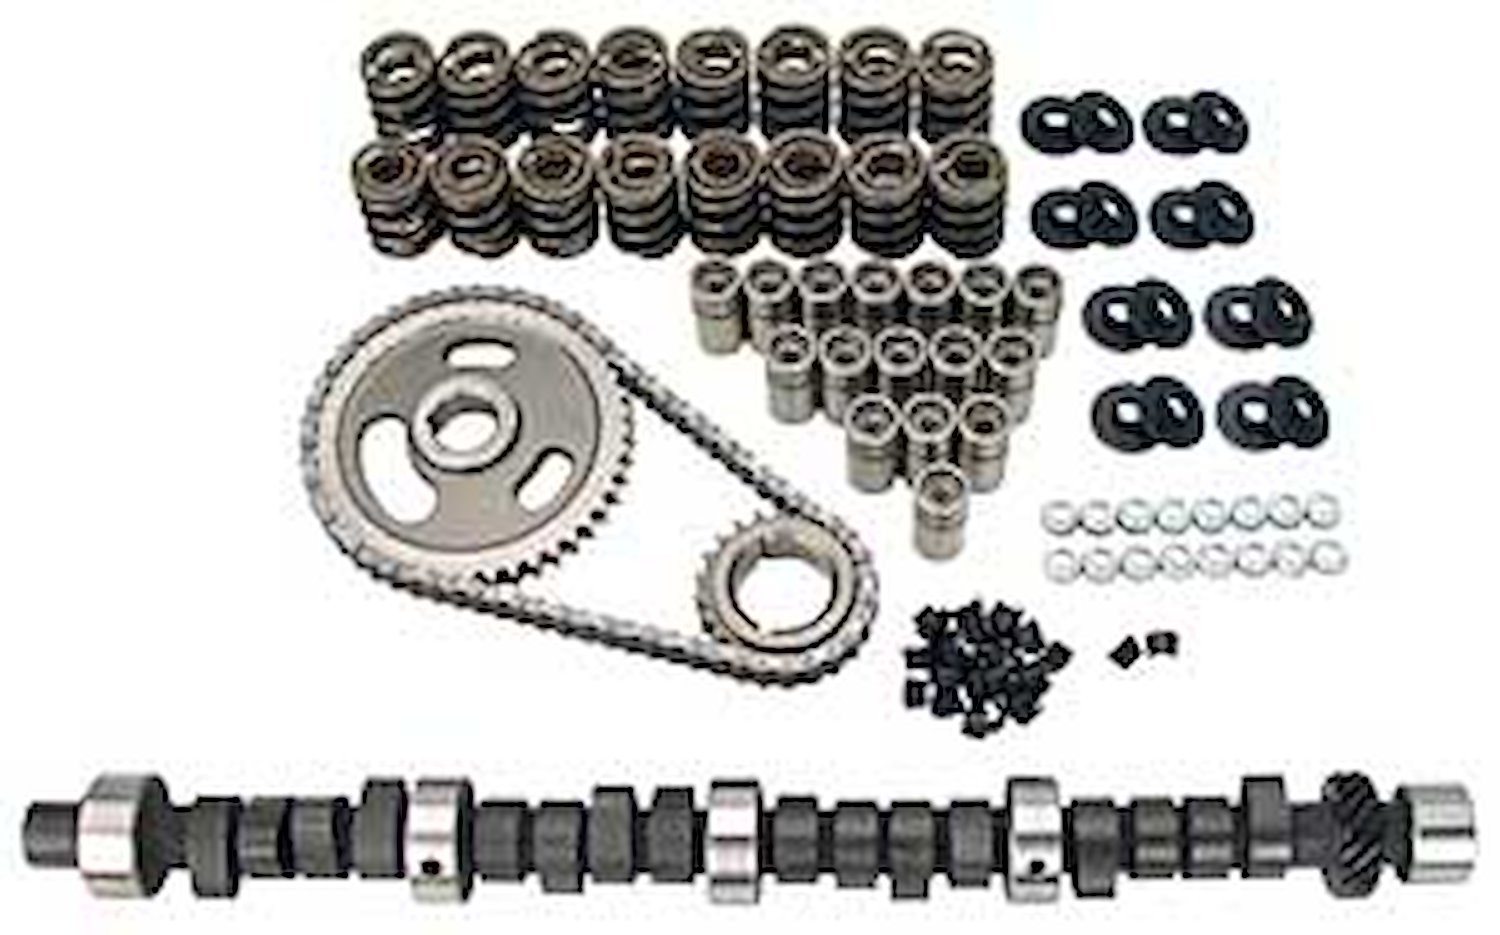 Thumpr Hydraulic Flat Tappet Camshaft Complete Kit Lift .486"/.473" Duration 279/297 RPM Range 2000-5800